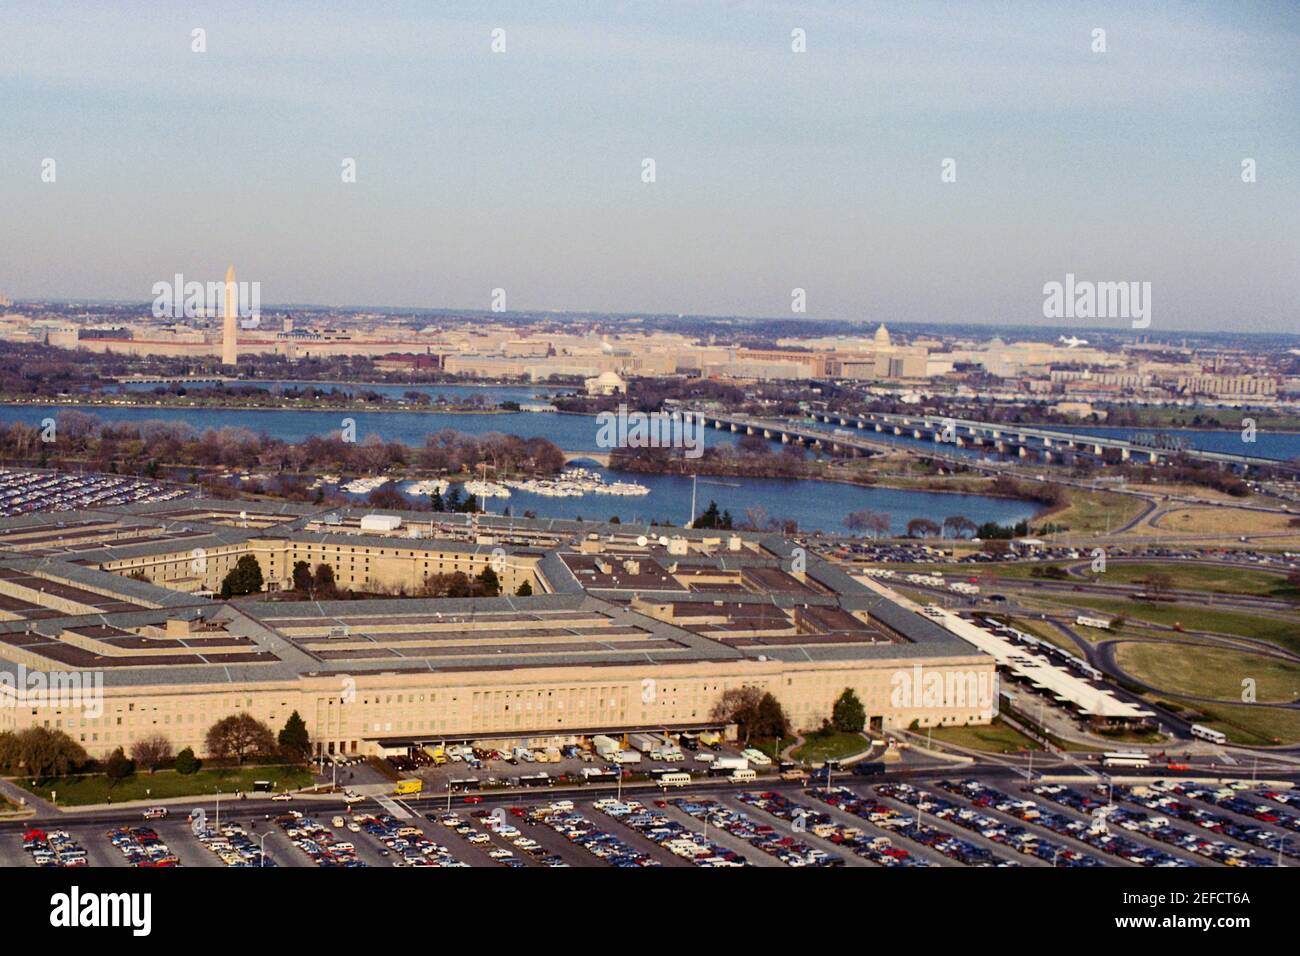 Aerial view of buildings in a city, The Pentagon, Washington DC, USA Stock Photo